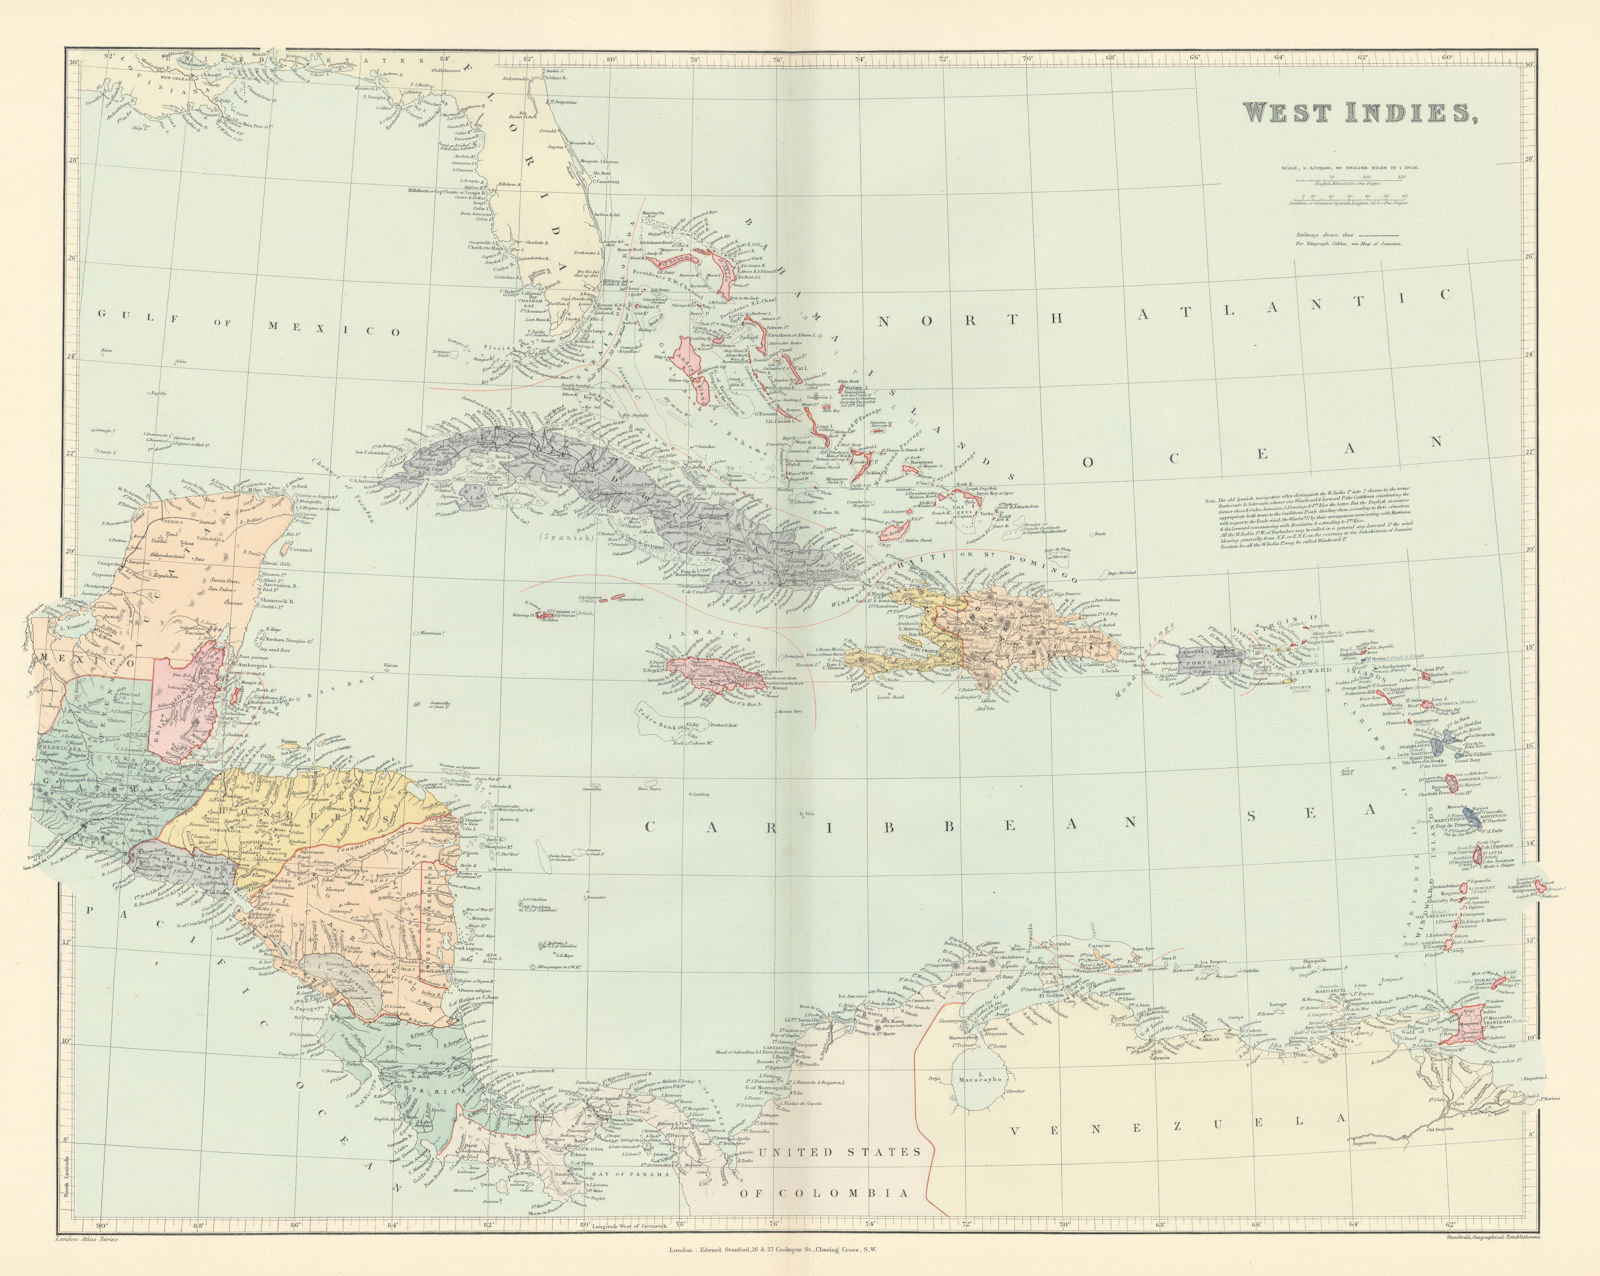 Associate Product West Indies Islands & Central America. Caribbean. STANFORD 1896 old map